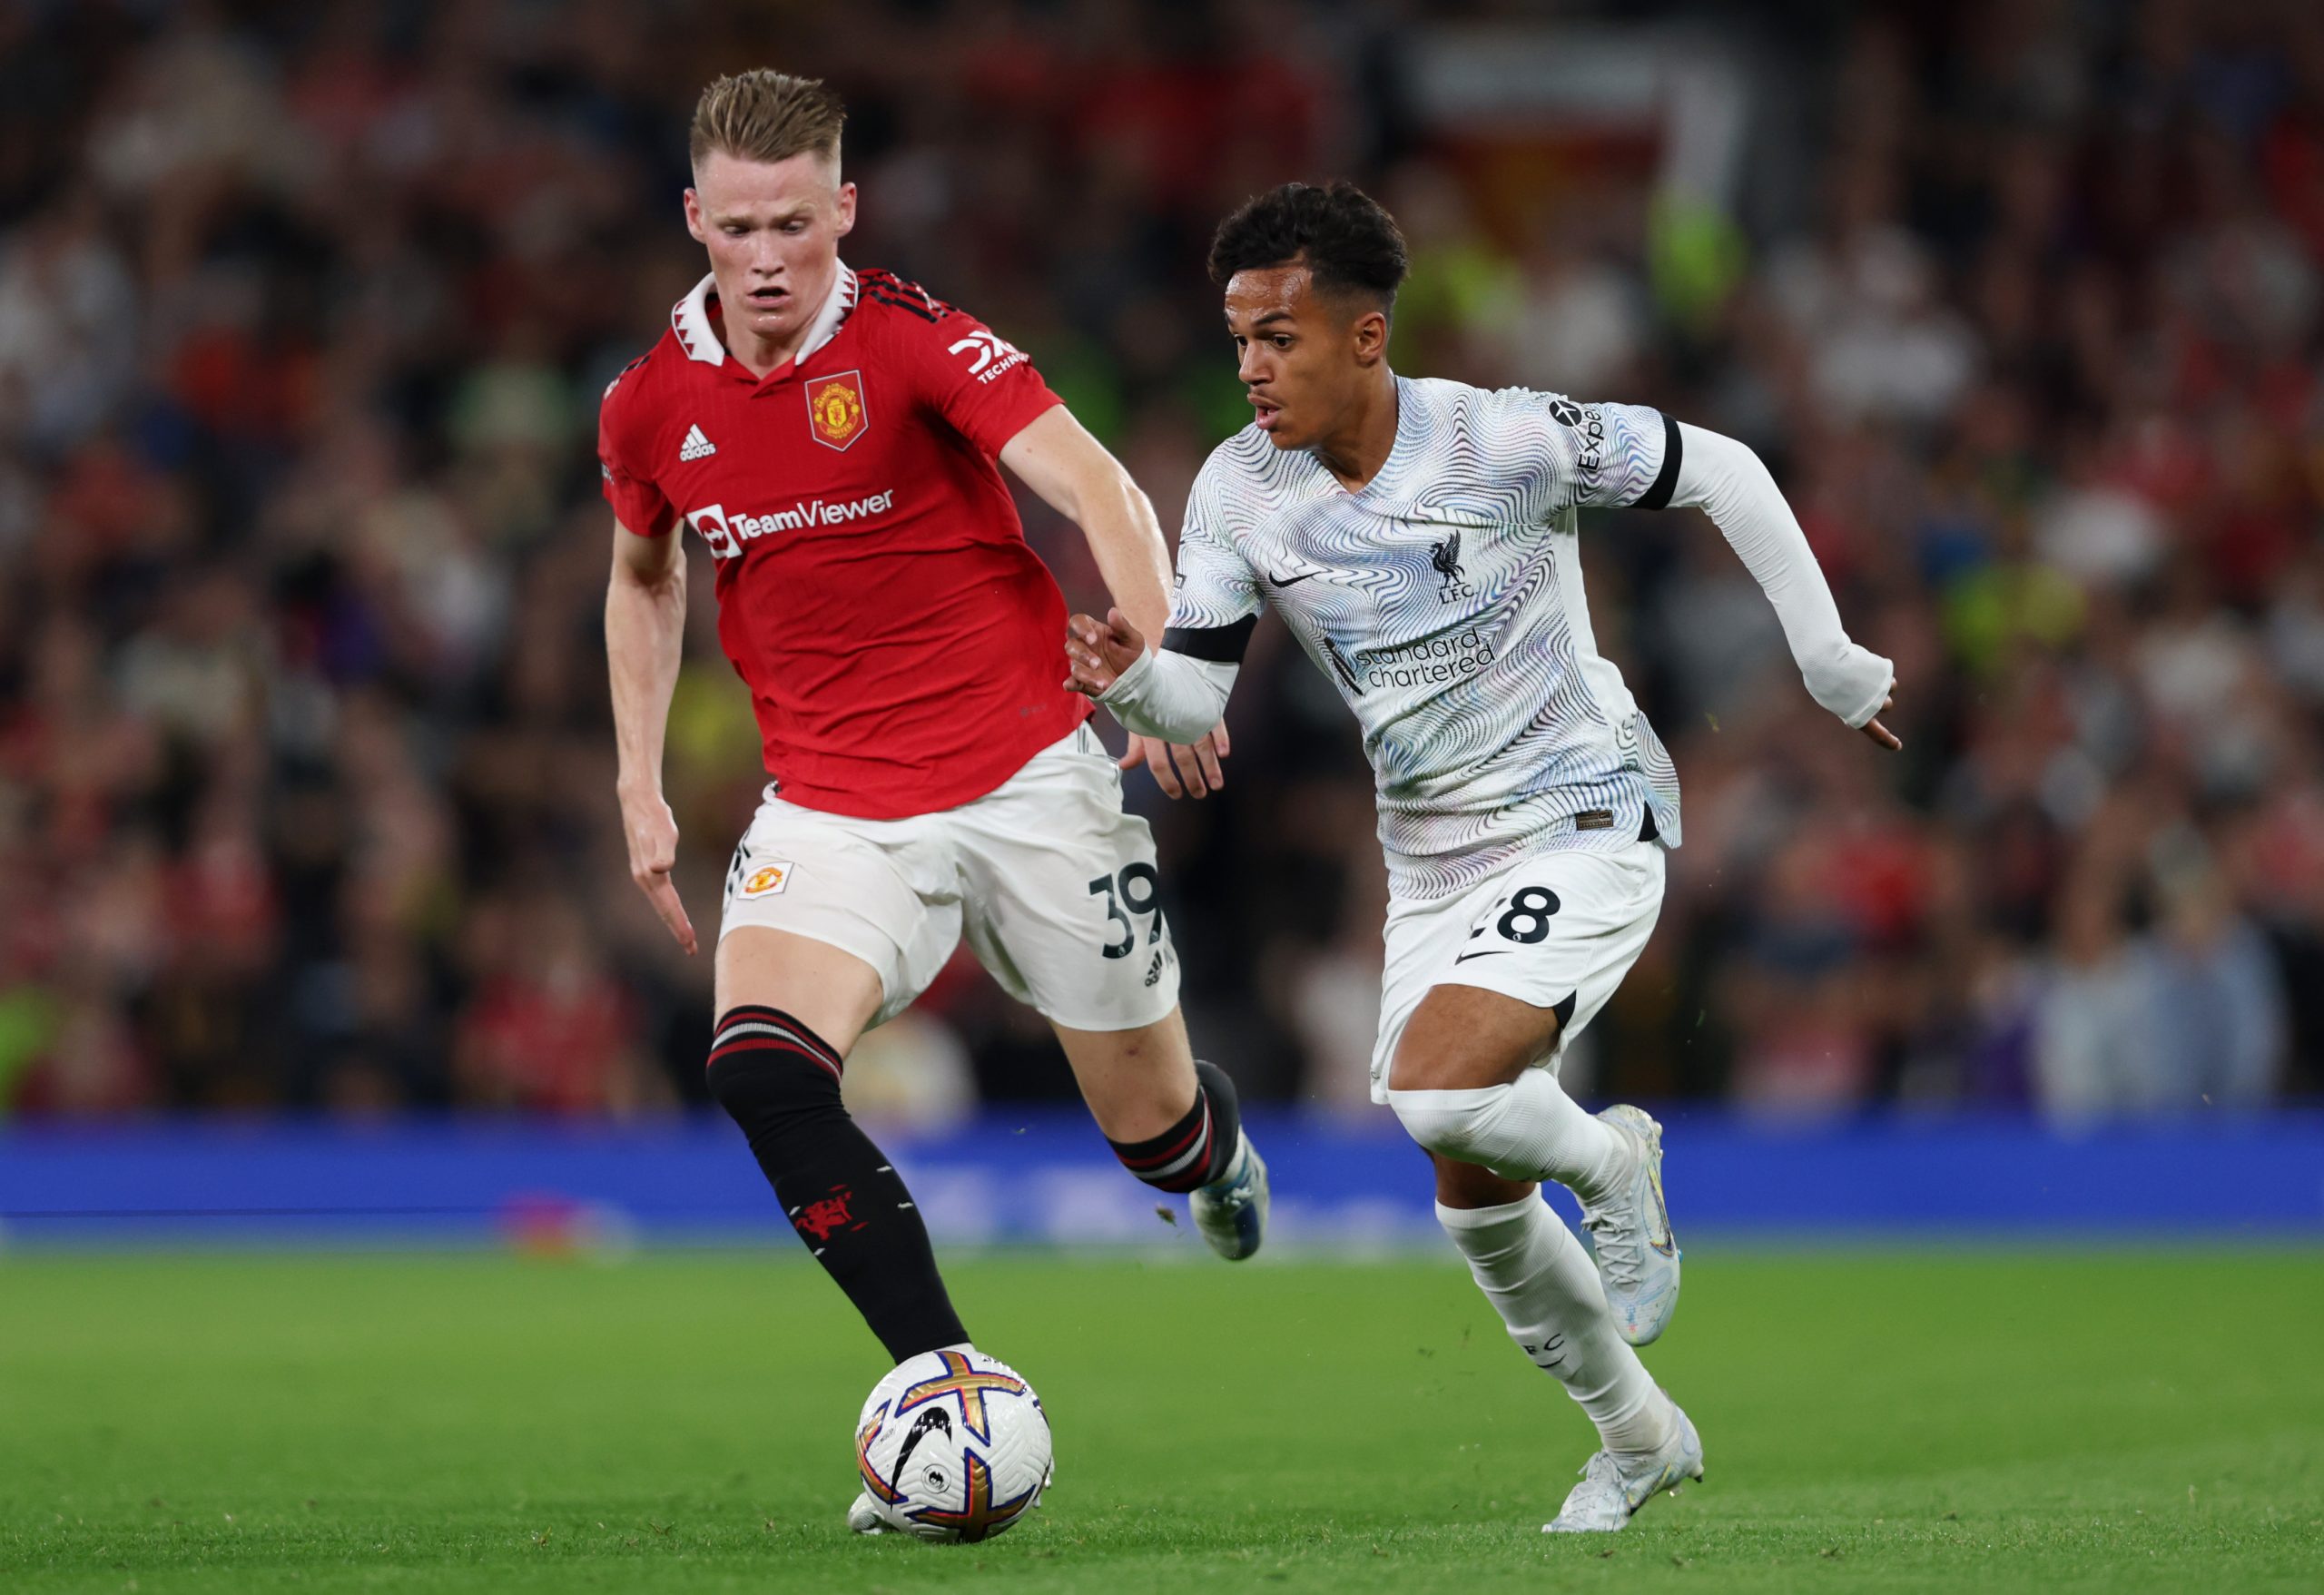  Scott McTominay deserves credit for his current run of form. (Photo by Clive Brunskill/Getty Images)